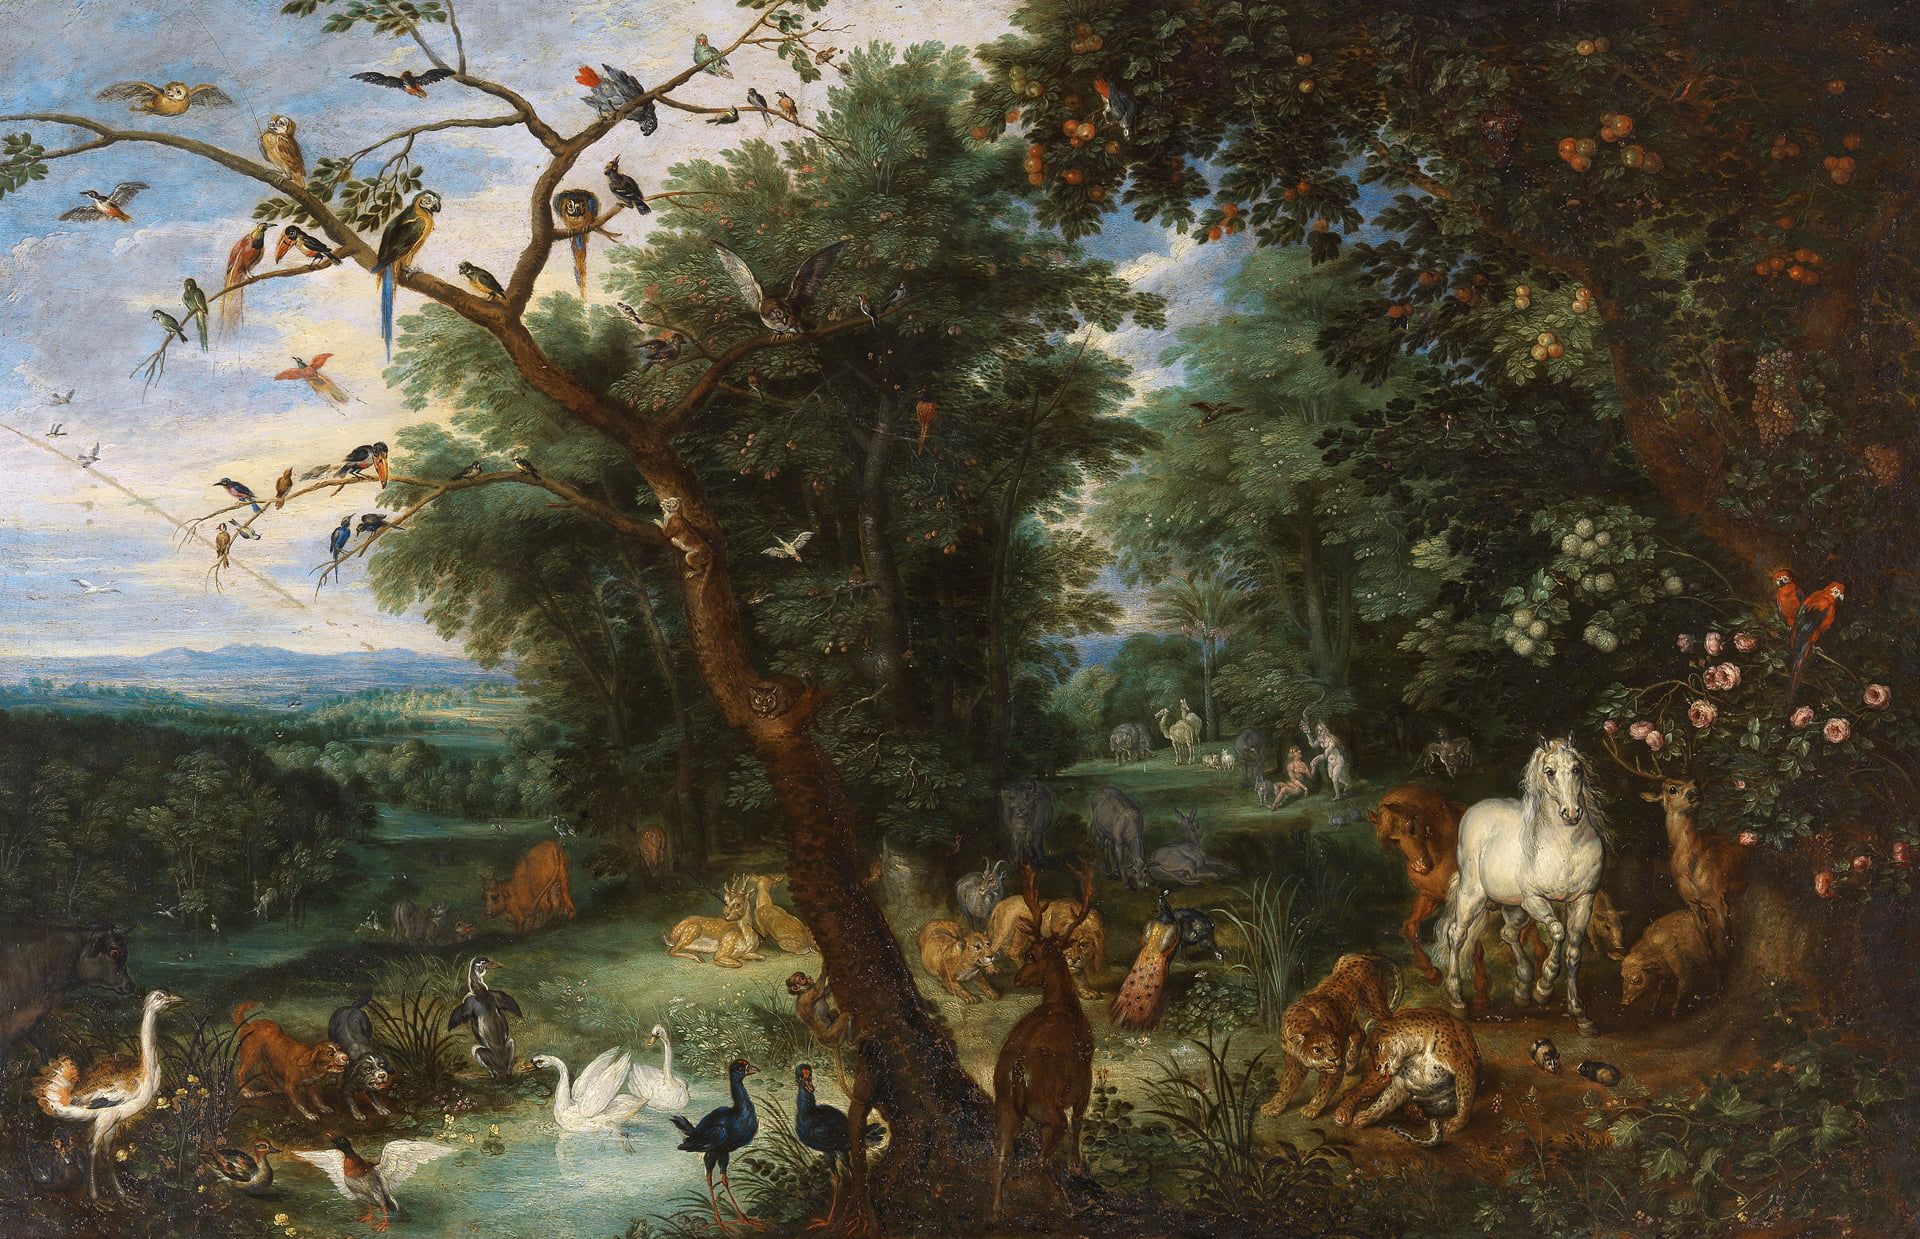 Free Download Hd Wallpaper Picture Mythology Jan Brueghel The